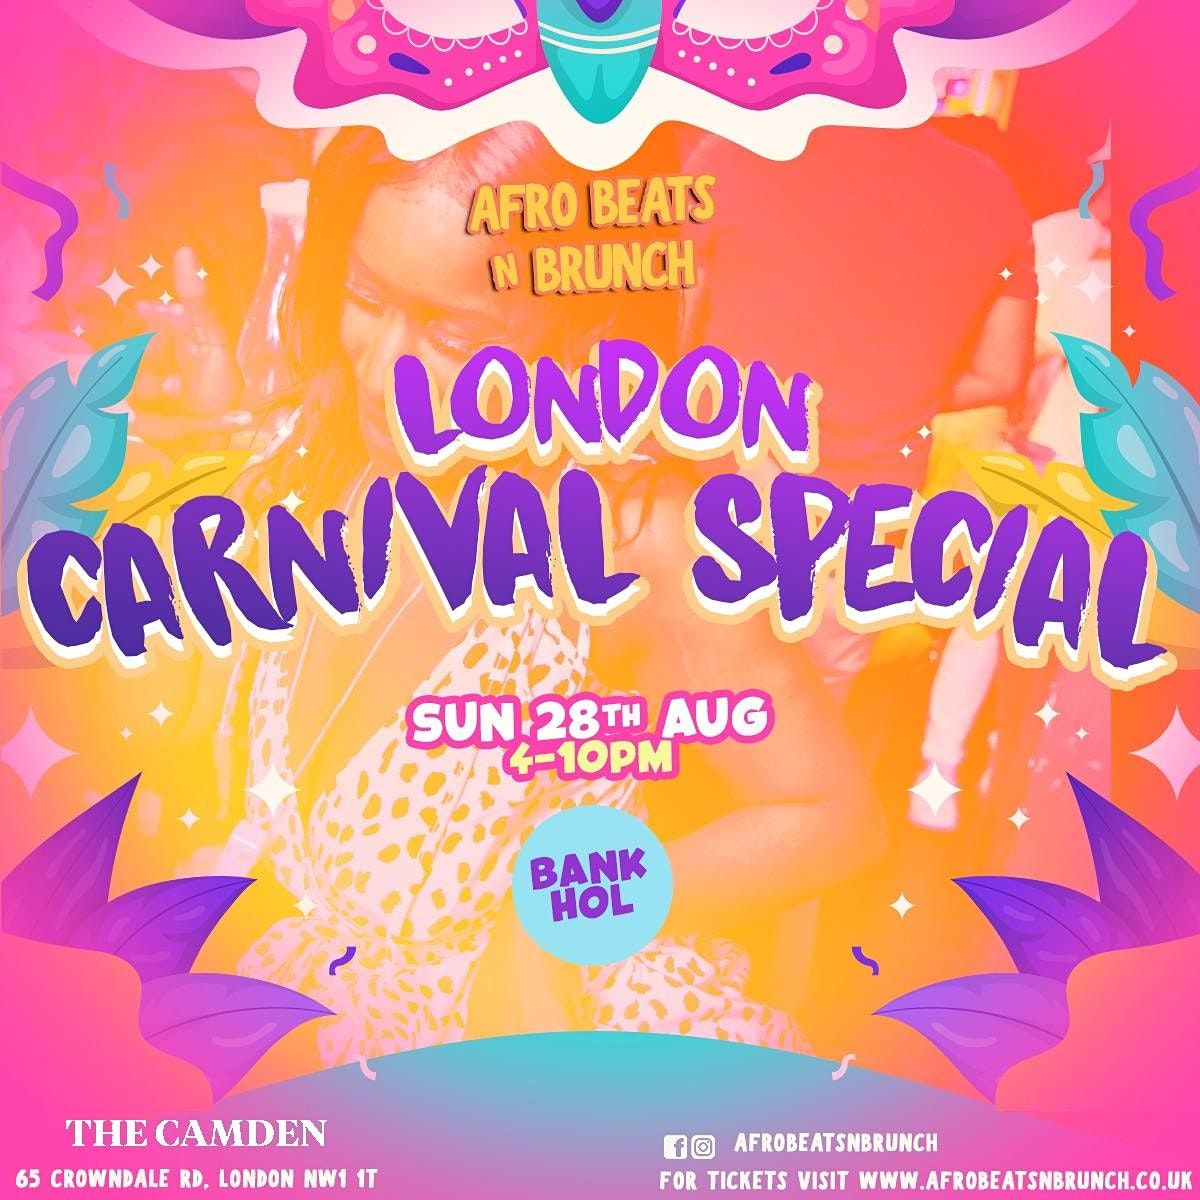 LONDON CARNIVAL SPECIAL: Bank Hol Sunday 28th August